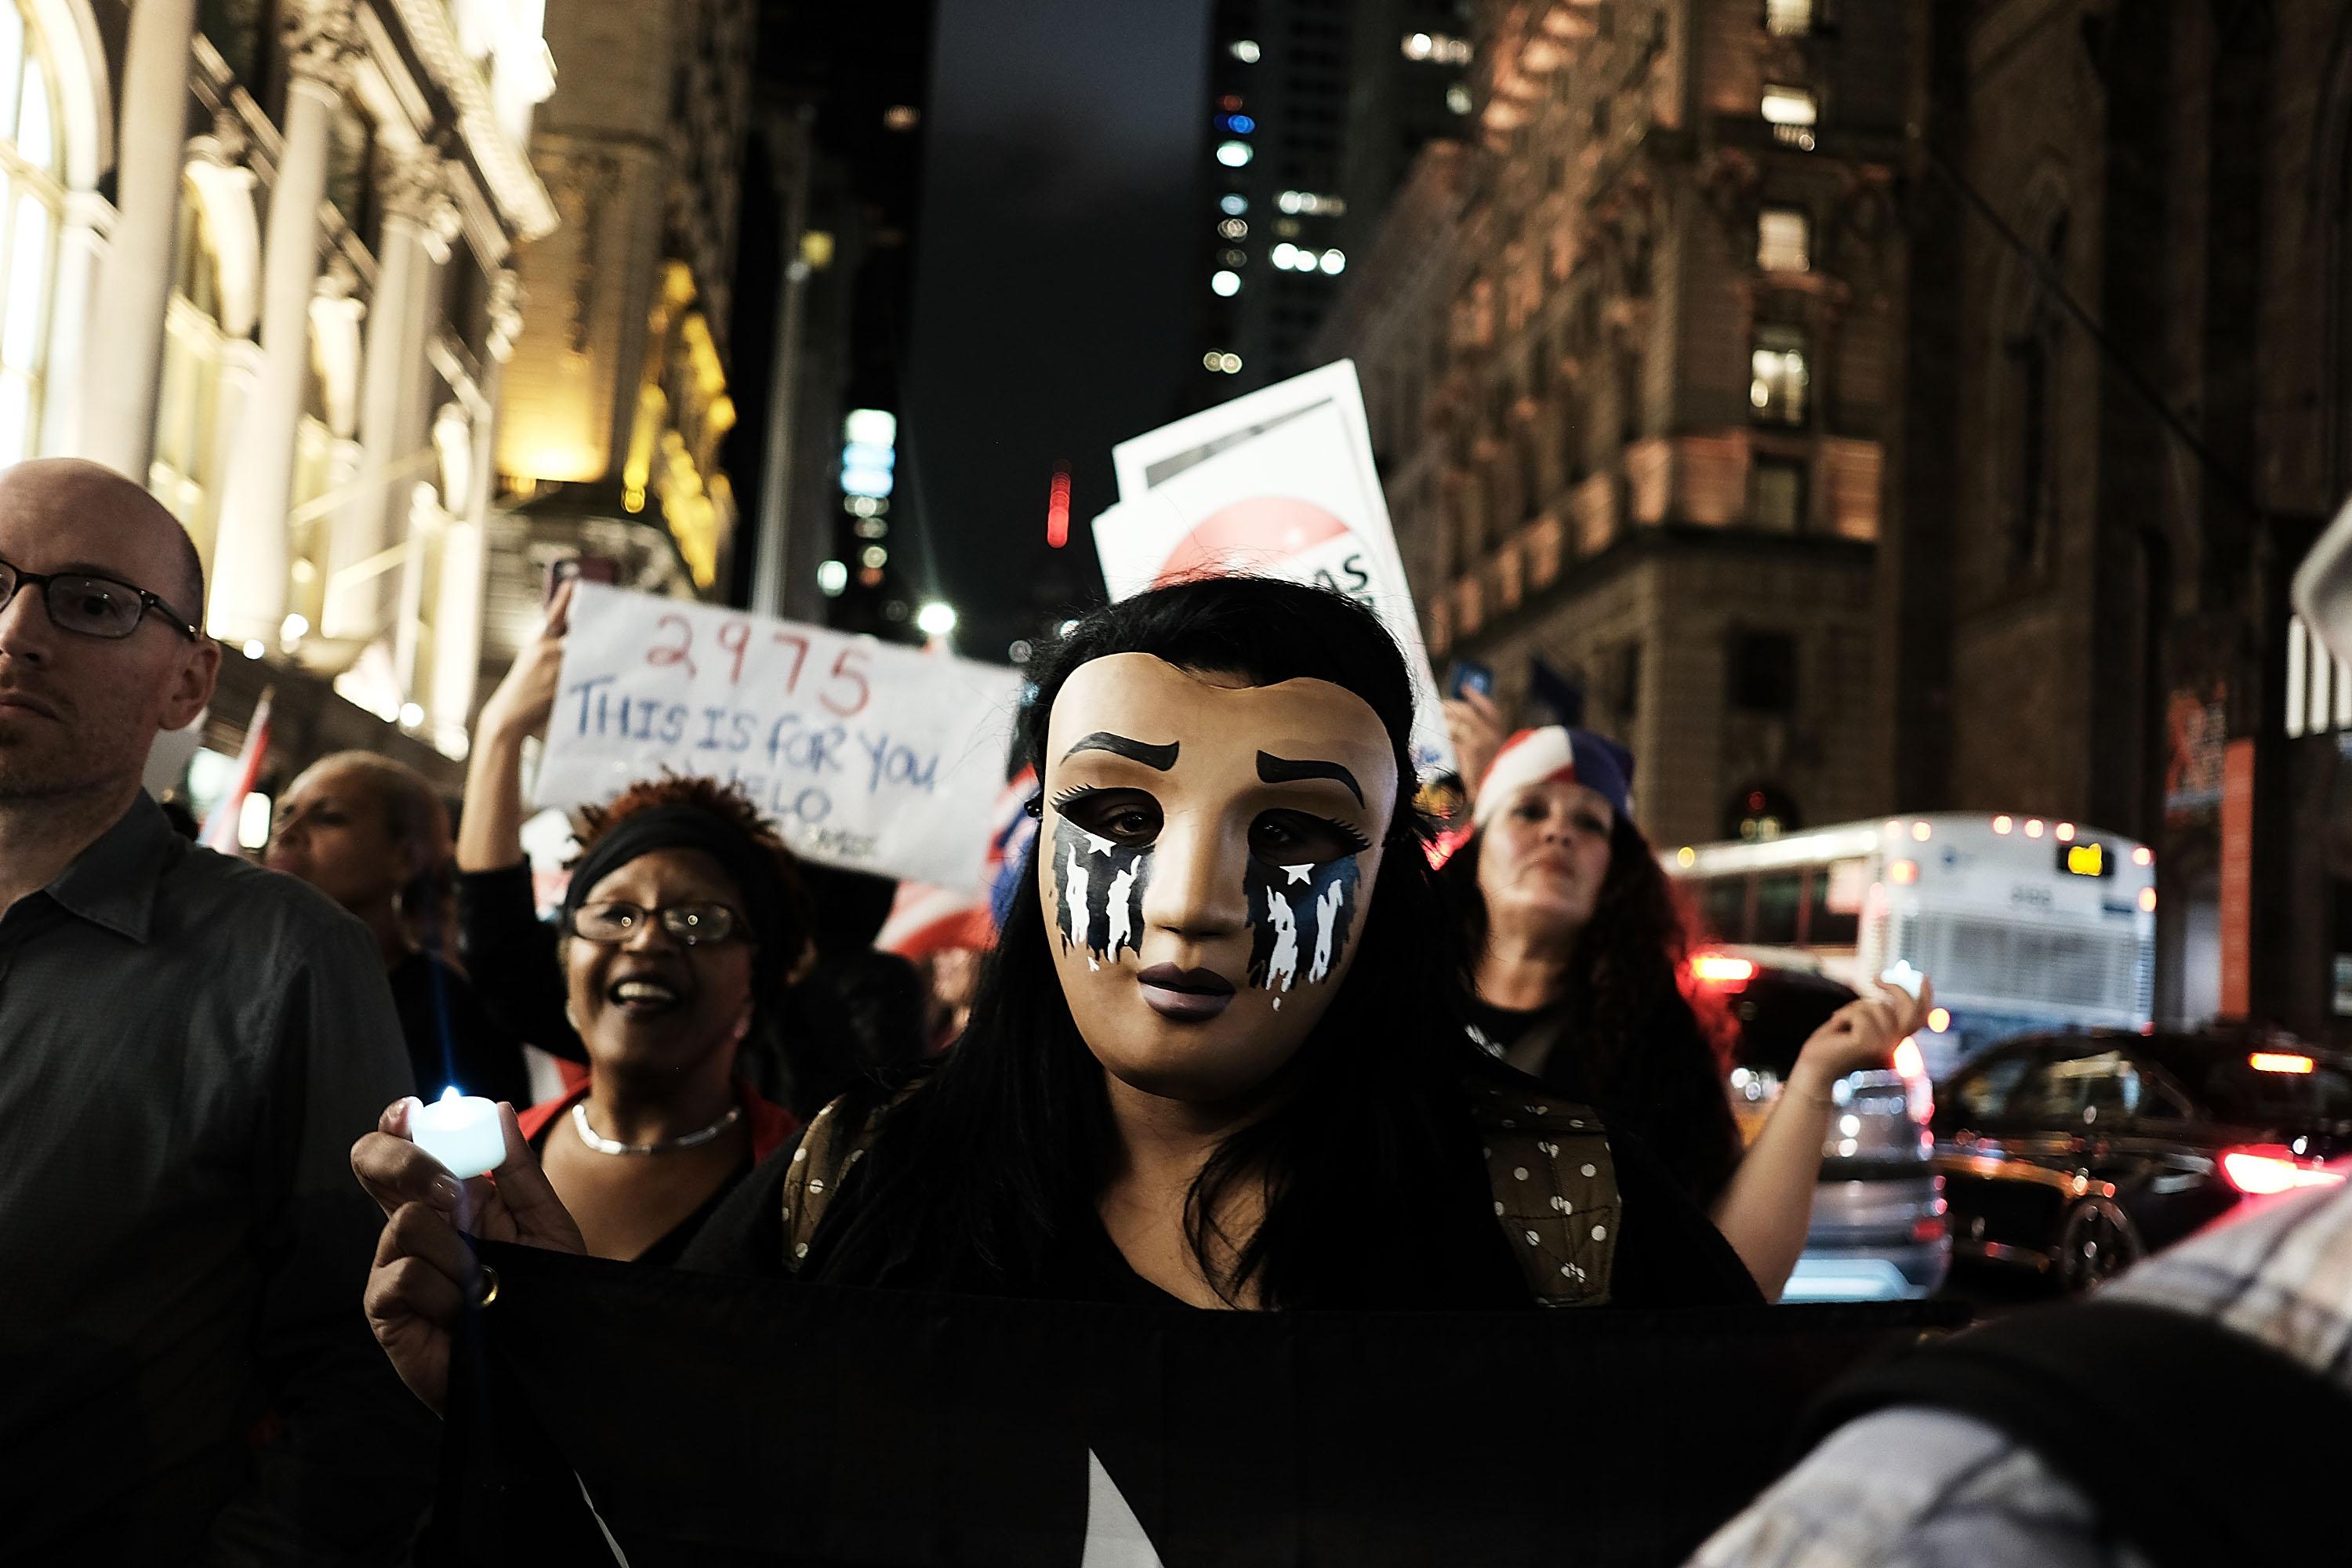 A person wearing a mask decorating to look like it is weeping leads a march in New York.